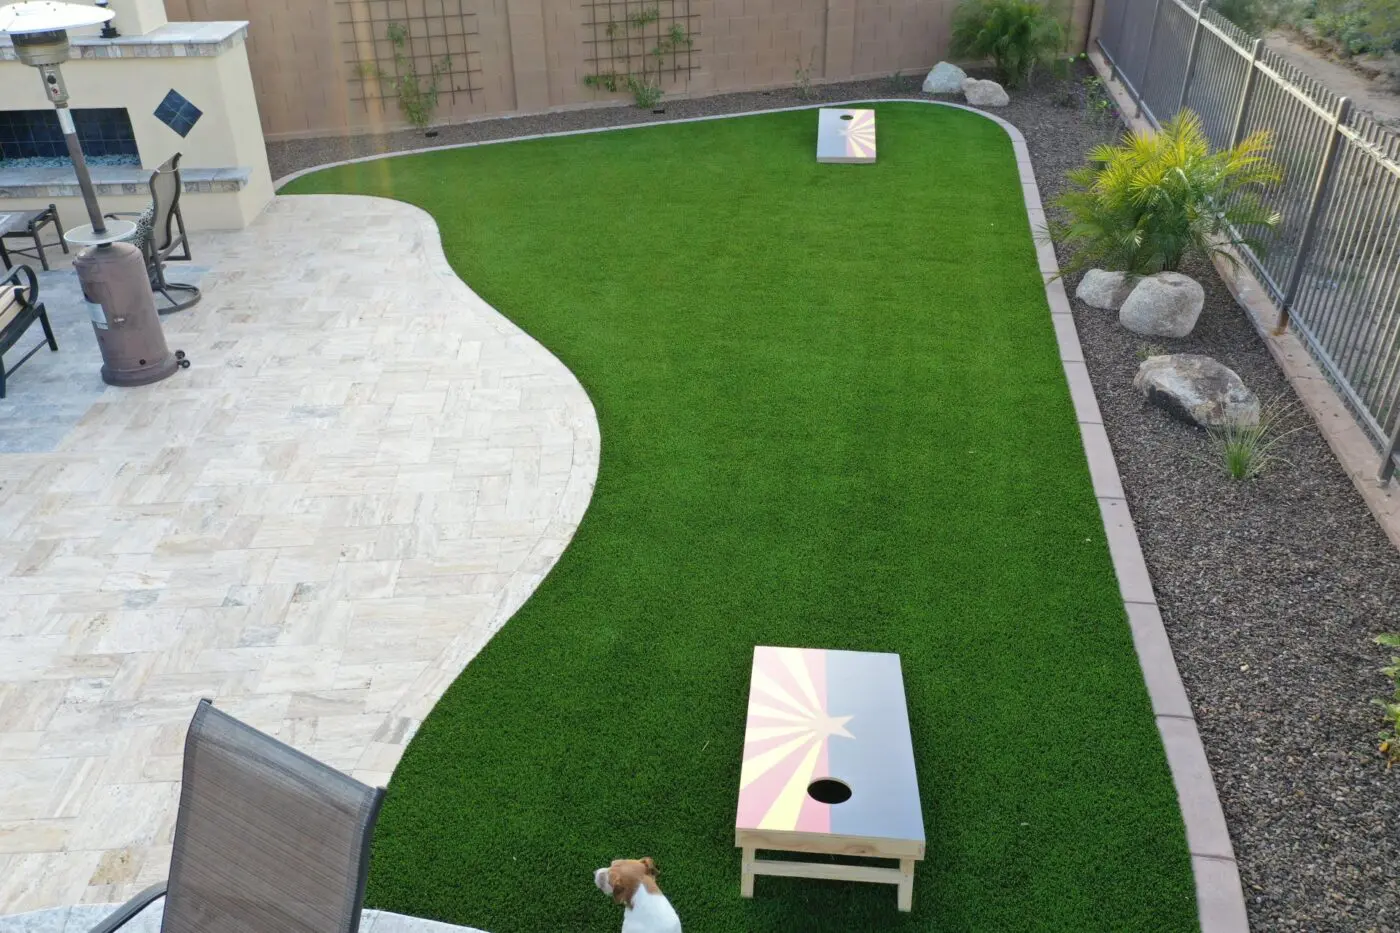 A backyard with pet turf features two cornhole boards set up for a game. The patio area is paved, and a brown dog is standing near one of the cornhole boards. The yard is bordered by a fence and has some plants and rocks along the edges, beautifully crafted by skilled artificial grass installers.